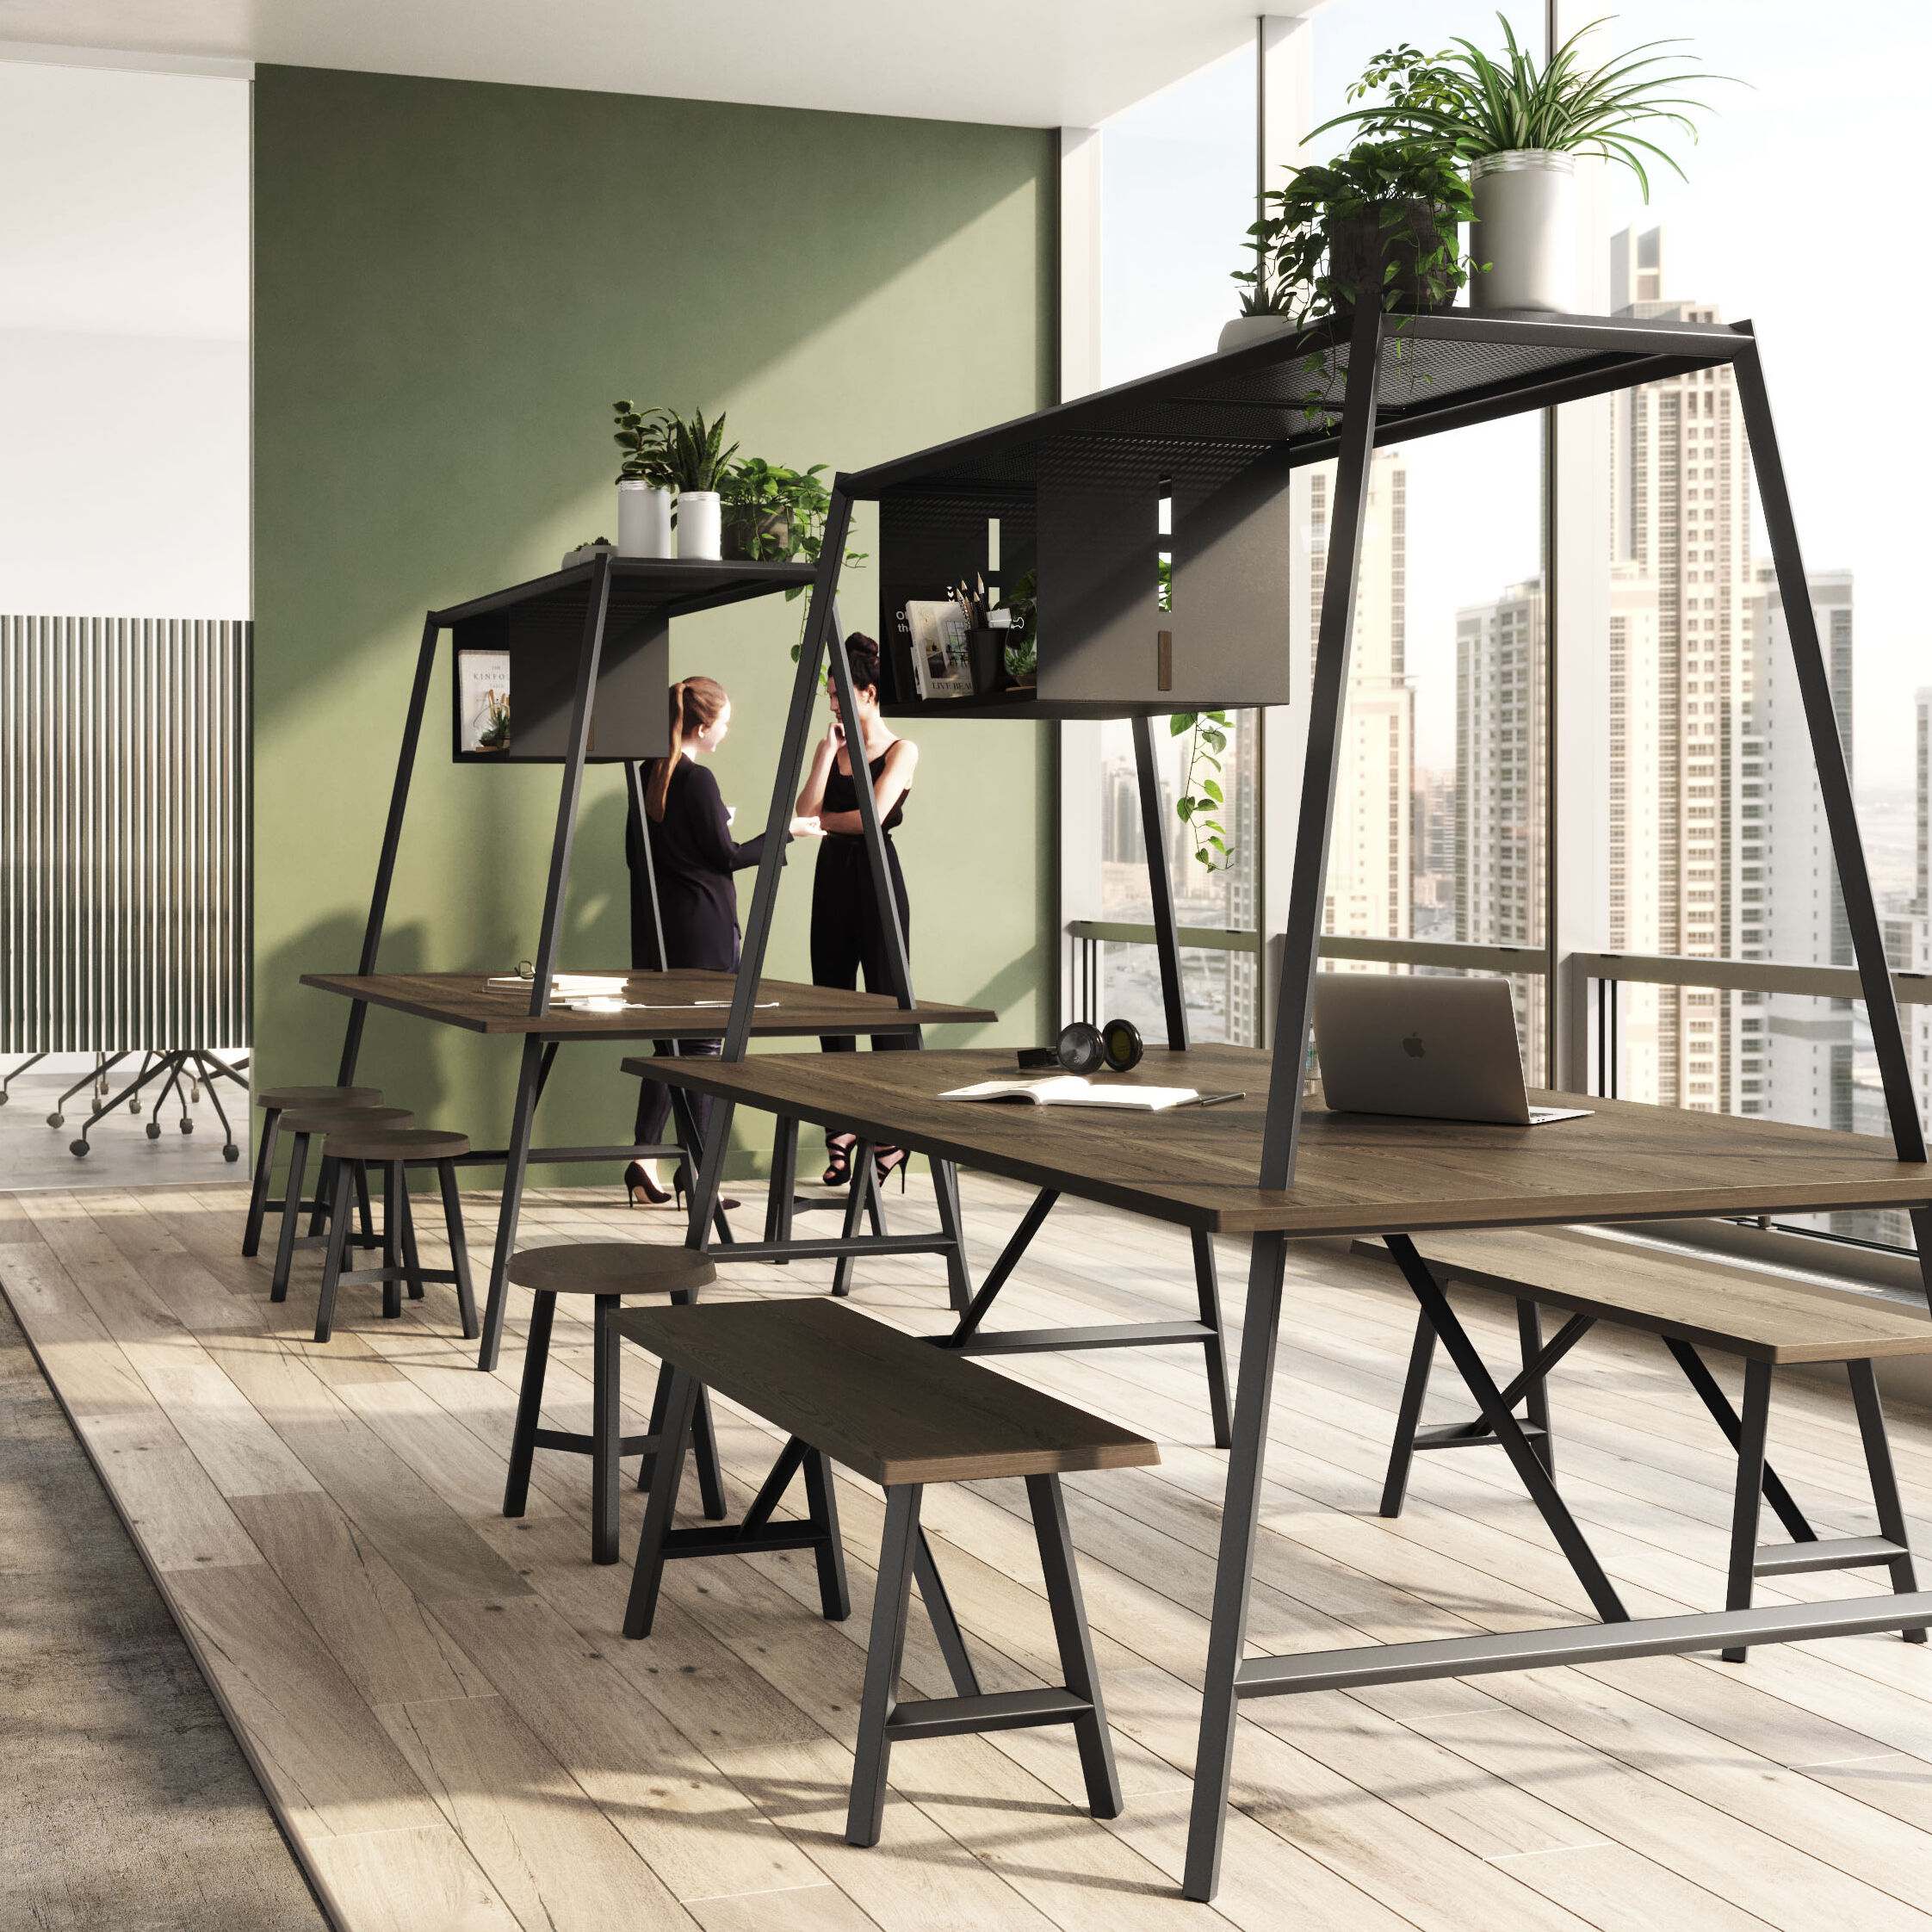 The Diamond Canopy Table and accompanying bench seats are designed with the agile work space in mind